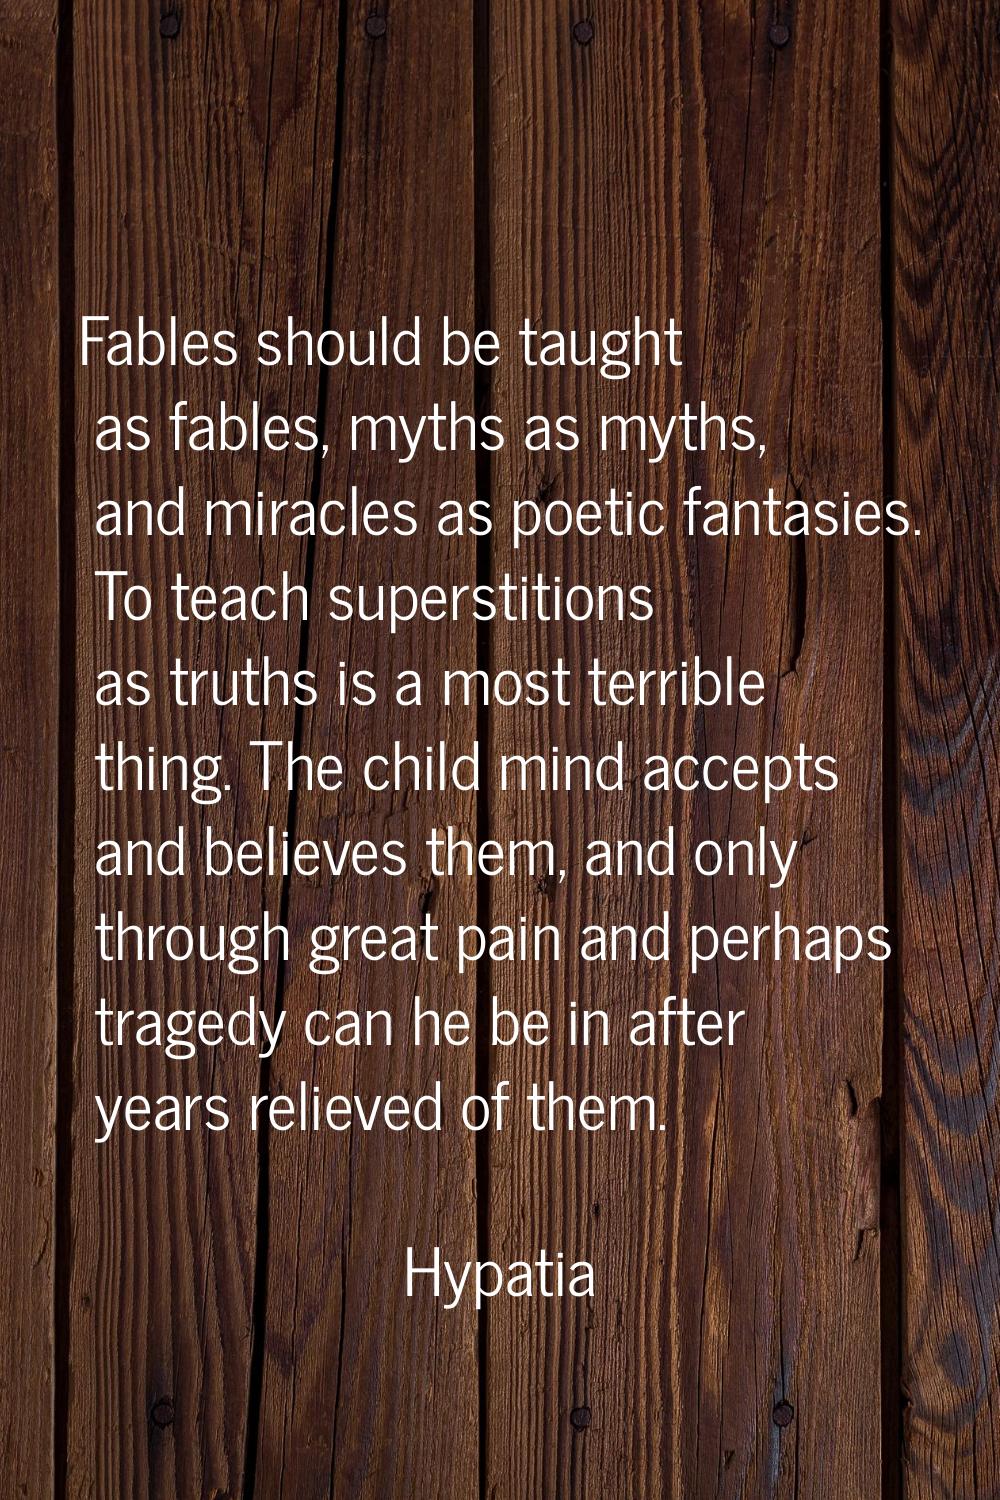 Fables should be taught as fables, myths as myths, and miracles as poetic fantasies. To teach super